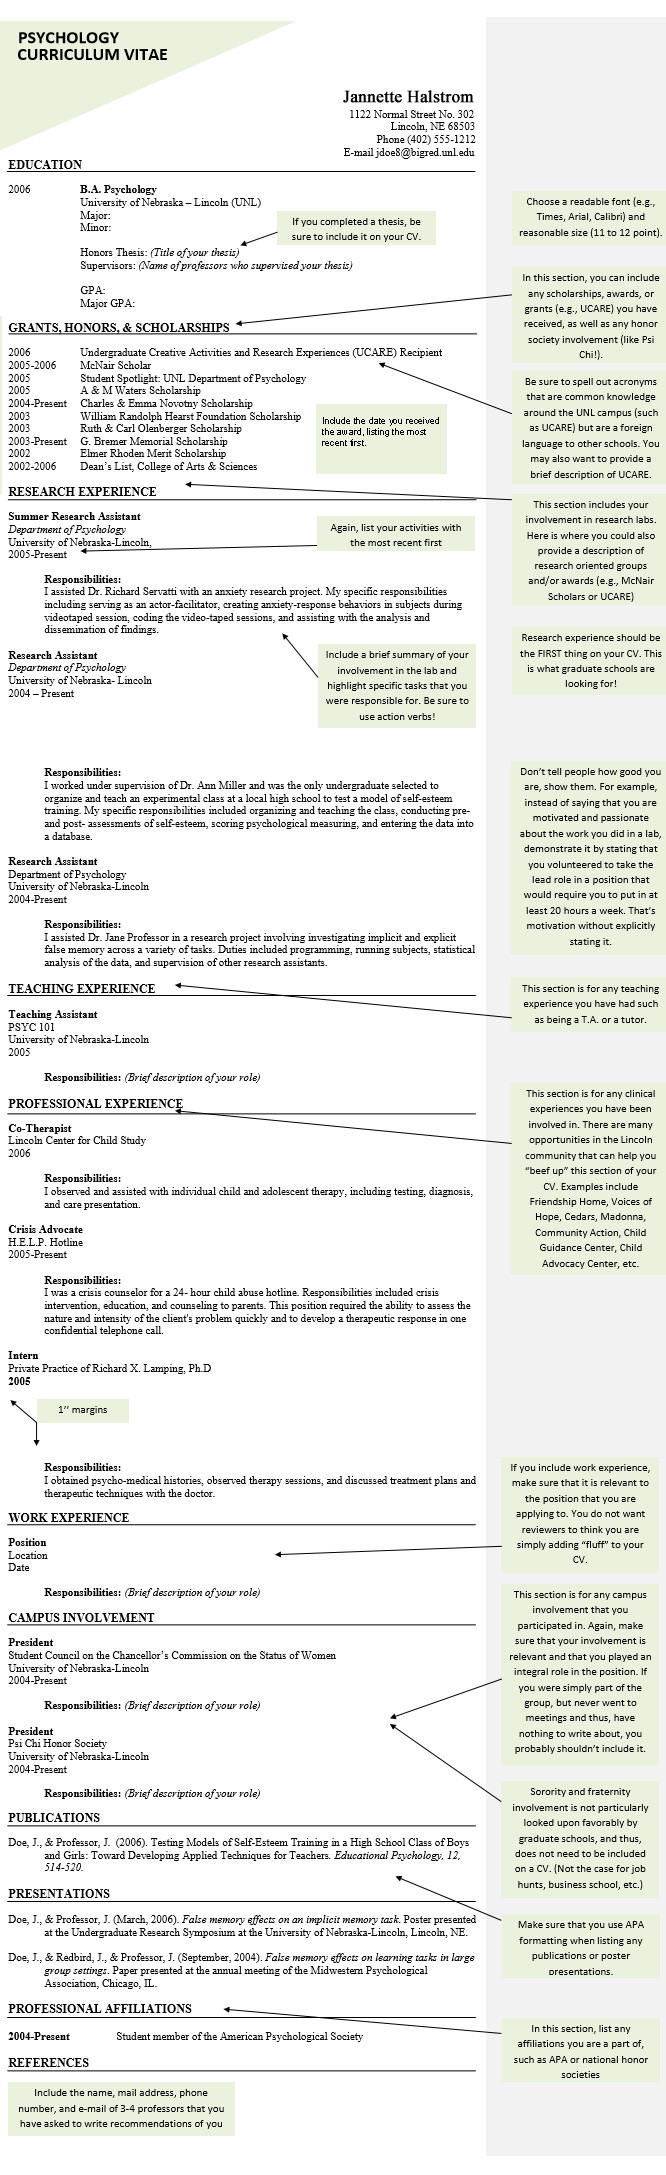 School Psychology Practicum Student Sample Resume Psychology Cv and Resume Samples, Templates and Tips